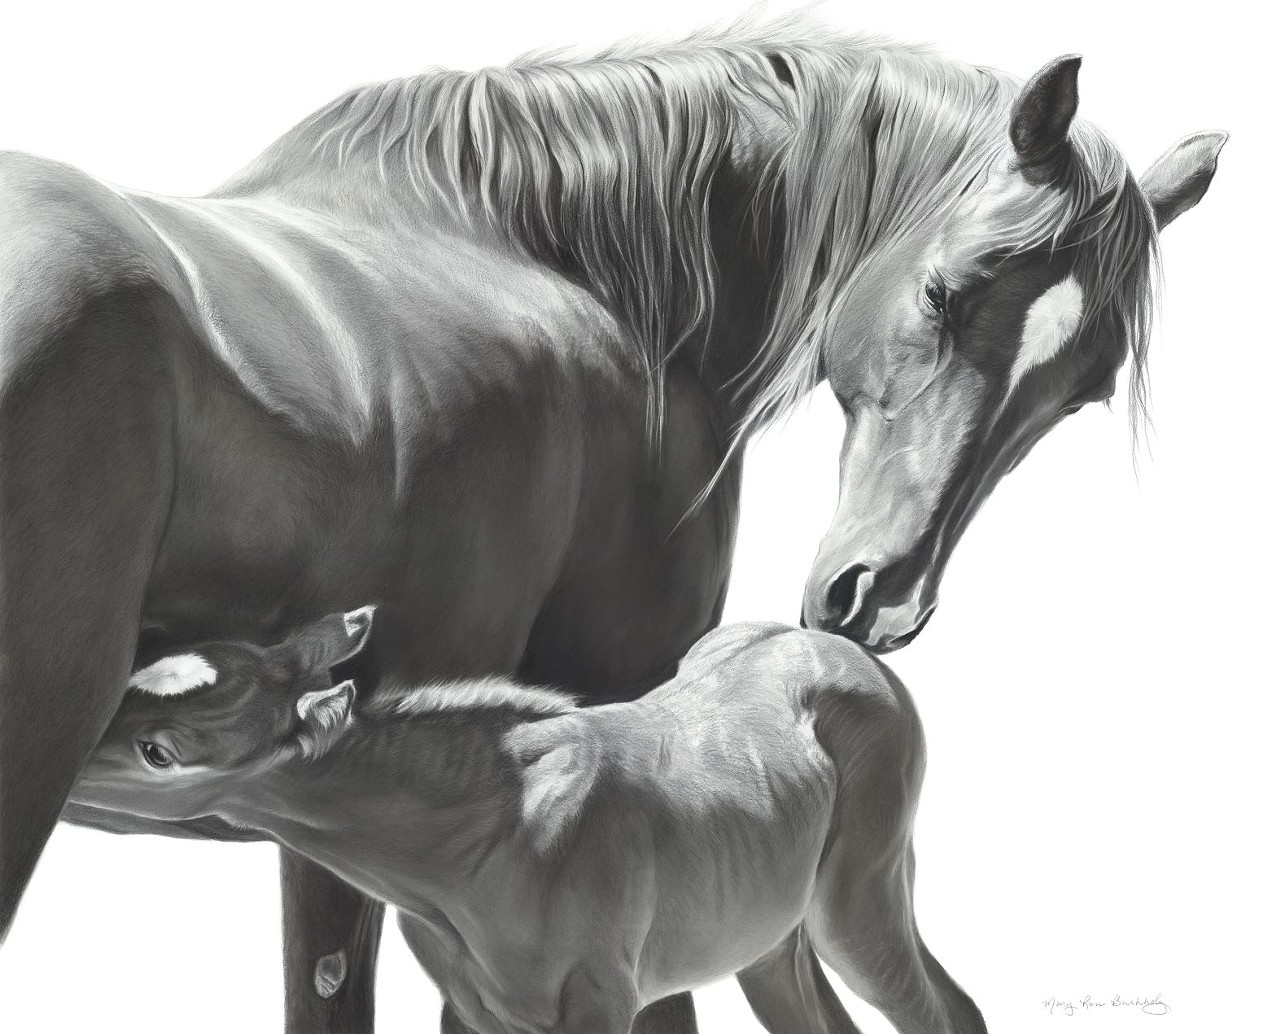 Mary Ross Buchholz, "Mother's Day", Charcoal and graphite, 22" x 27", $9,000-$12,000